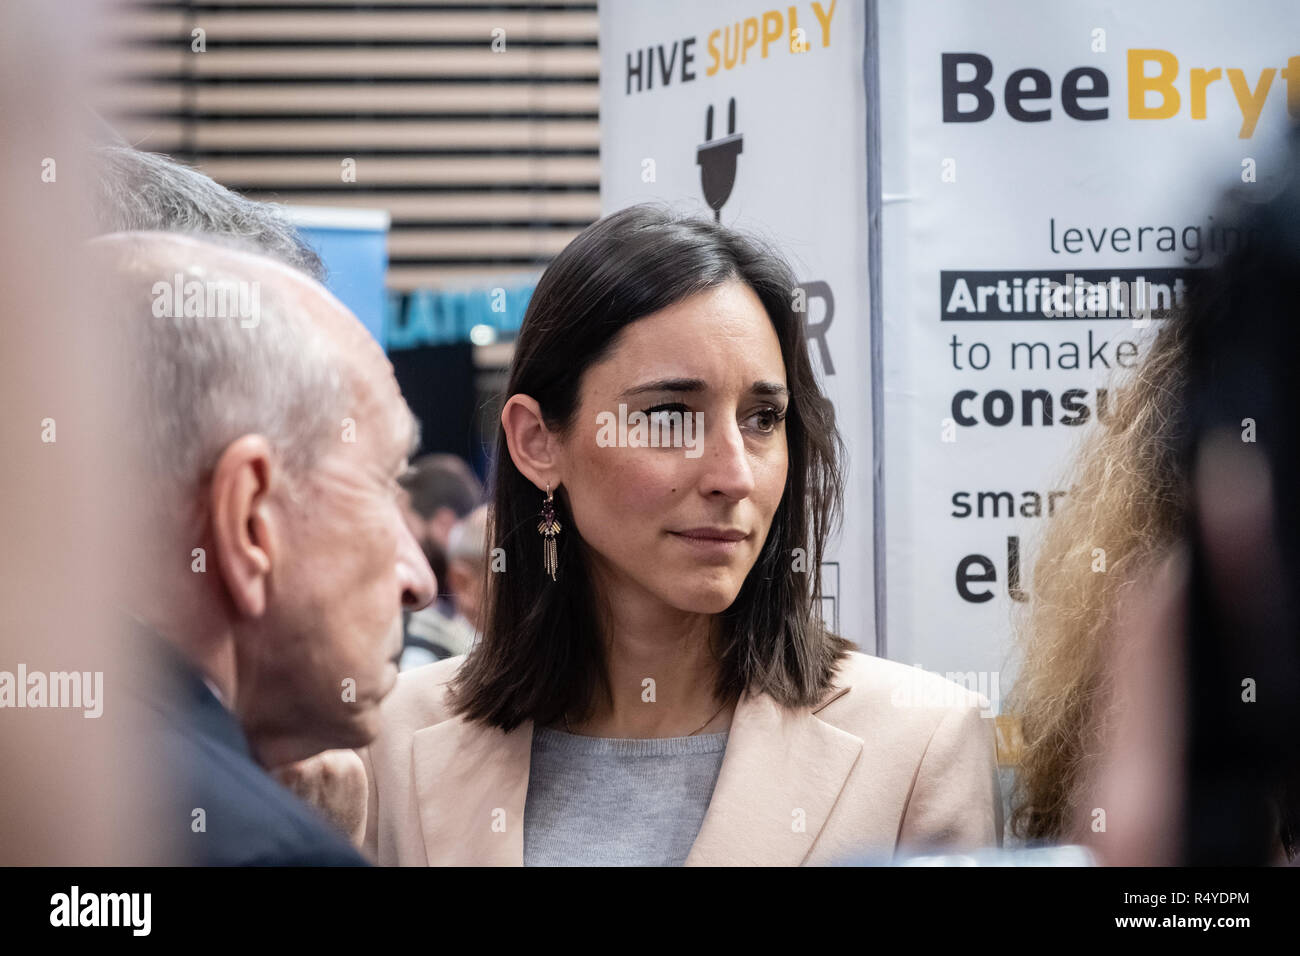 Lyon, France. 28th Nov 2018. Brune Poirson Secretary of State, Minister of the Ecological and Solidarity Transition, went to Pollutec, the 28th International Exhibition of Equipment, Technologies and Environmental Services. She was accompanied by Gérard Collomb, Mayor of Lyon and David Kimelfeld the President of the Metropolis of Lyon. Credit: FRANCK CHAPOLARD/Alamy Live News Stock Photo